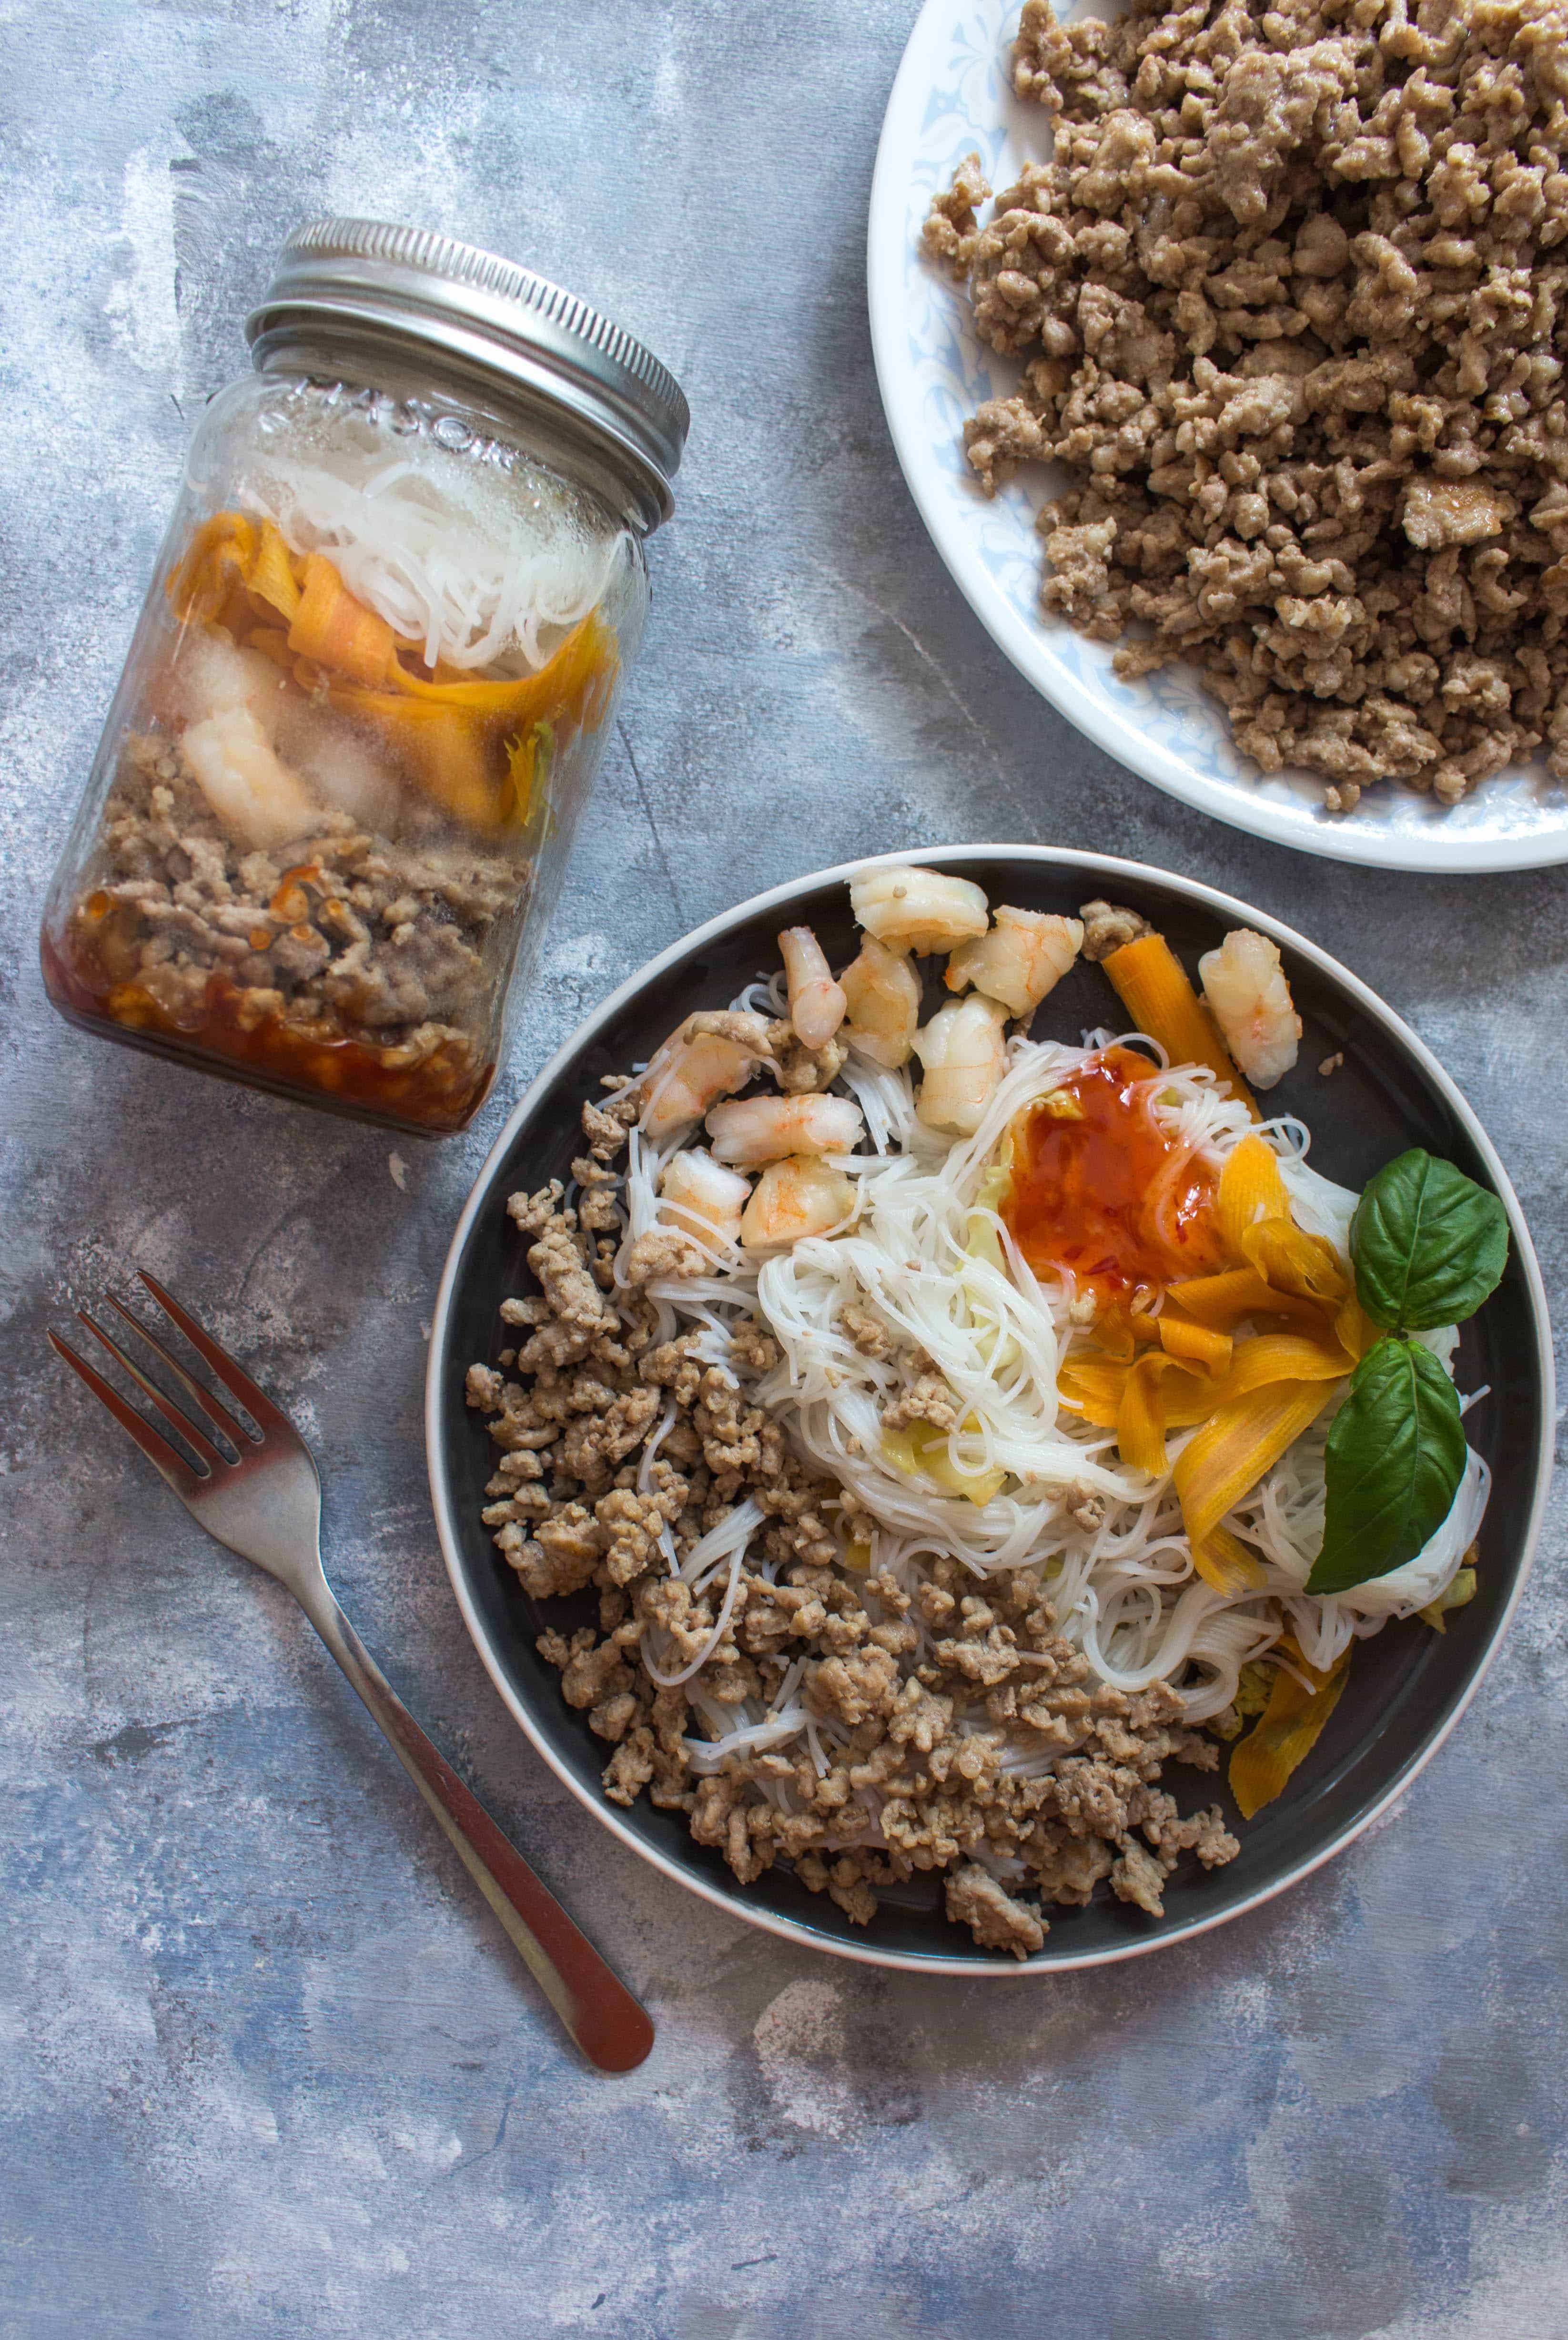 Mason Jar Meals: This easy deconstructed spring roll in a jar is a fun and delicious way to get your spring roll fix without having to fry or wrap a roll!